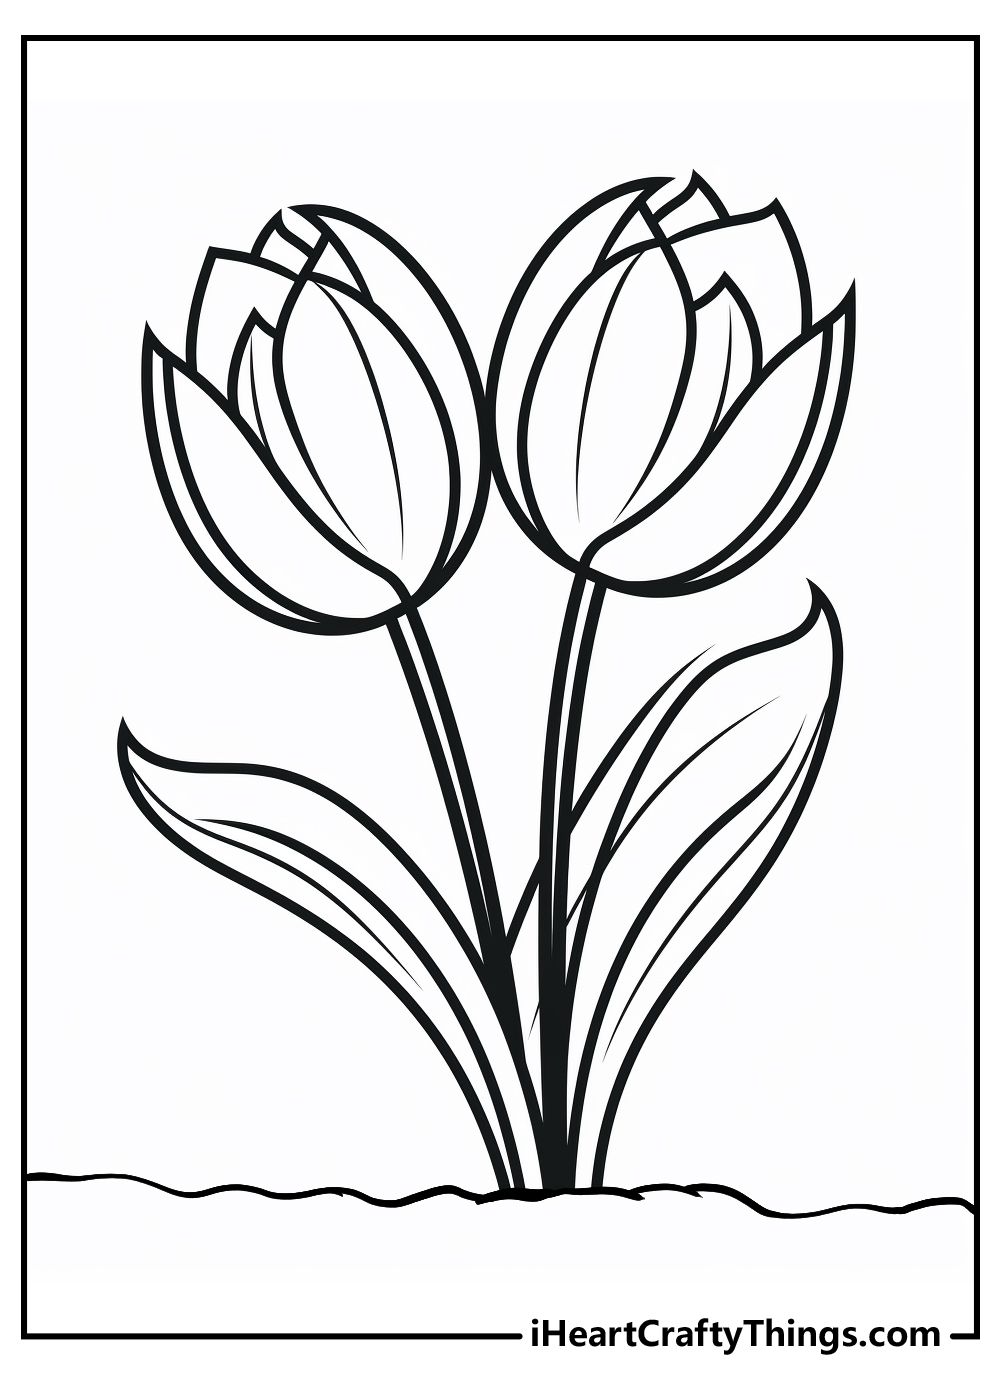 Tulip coloring pages updated